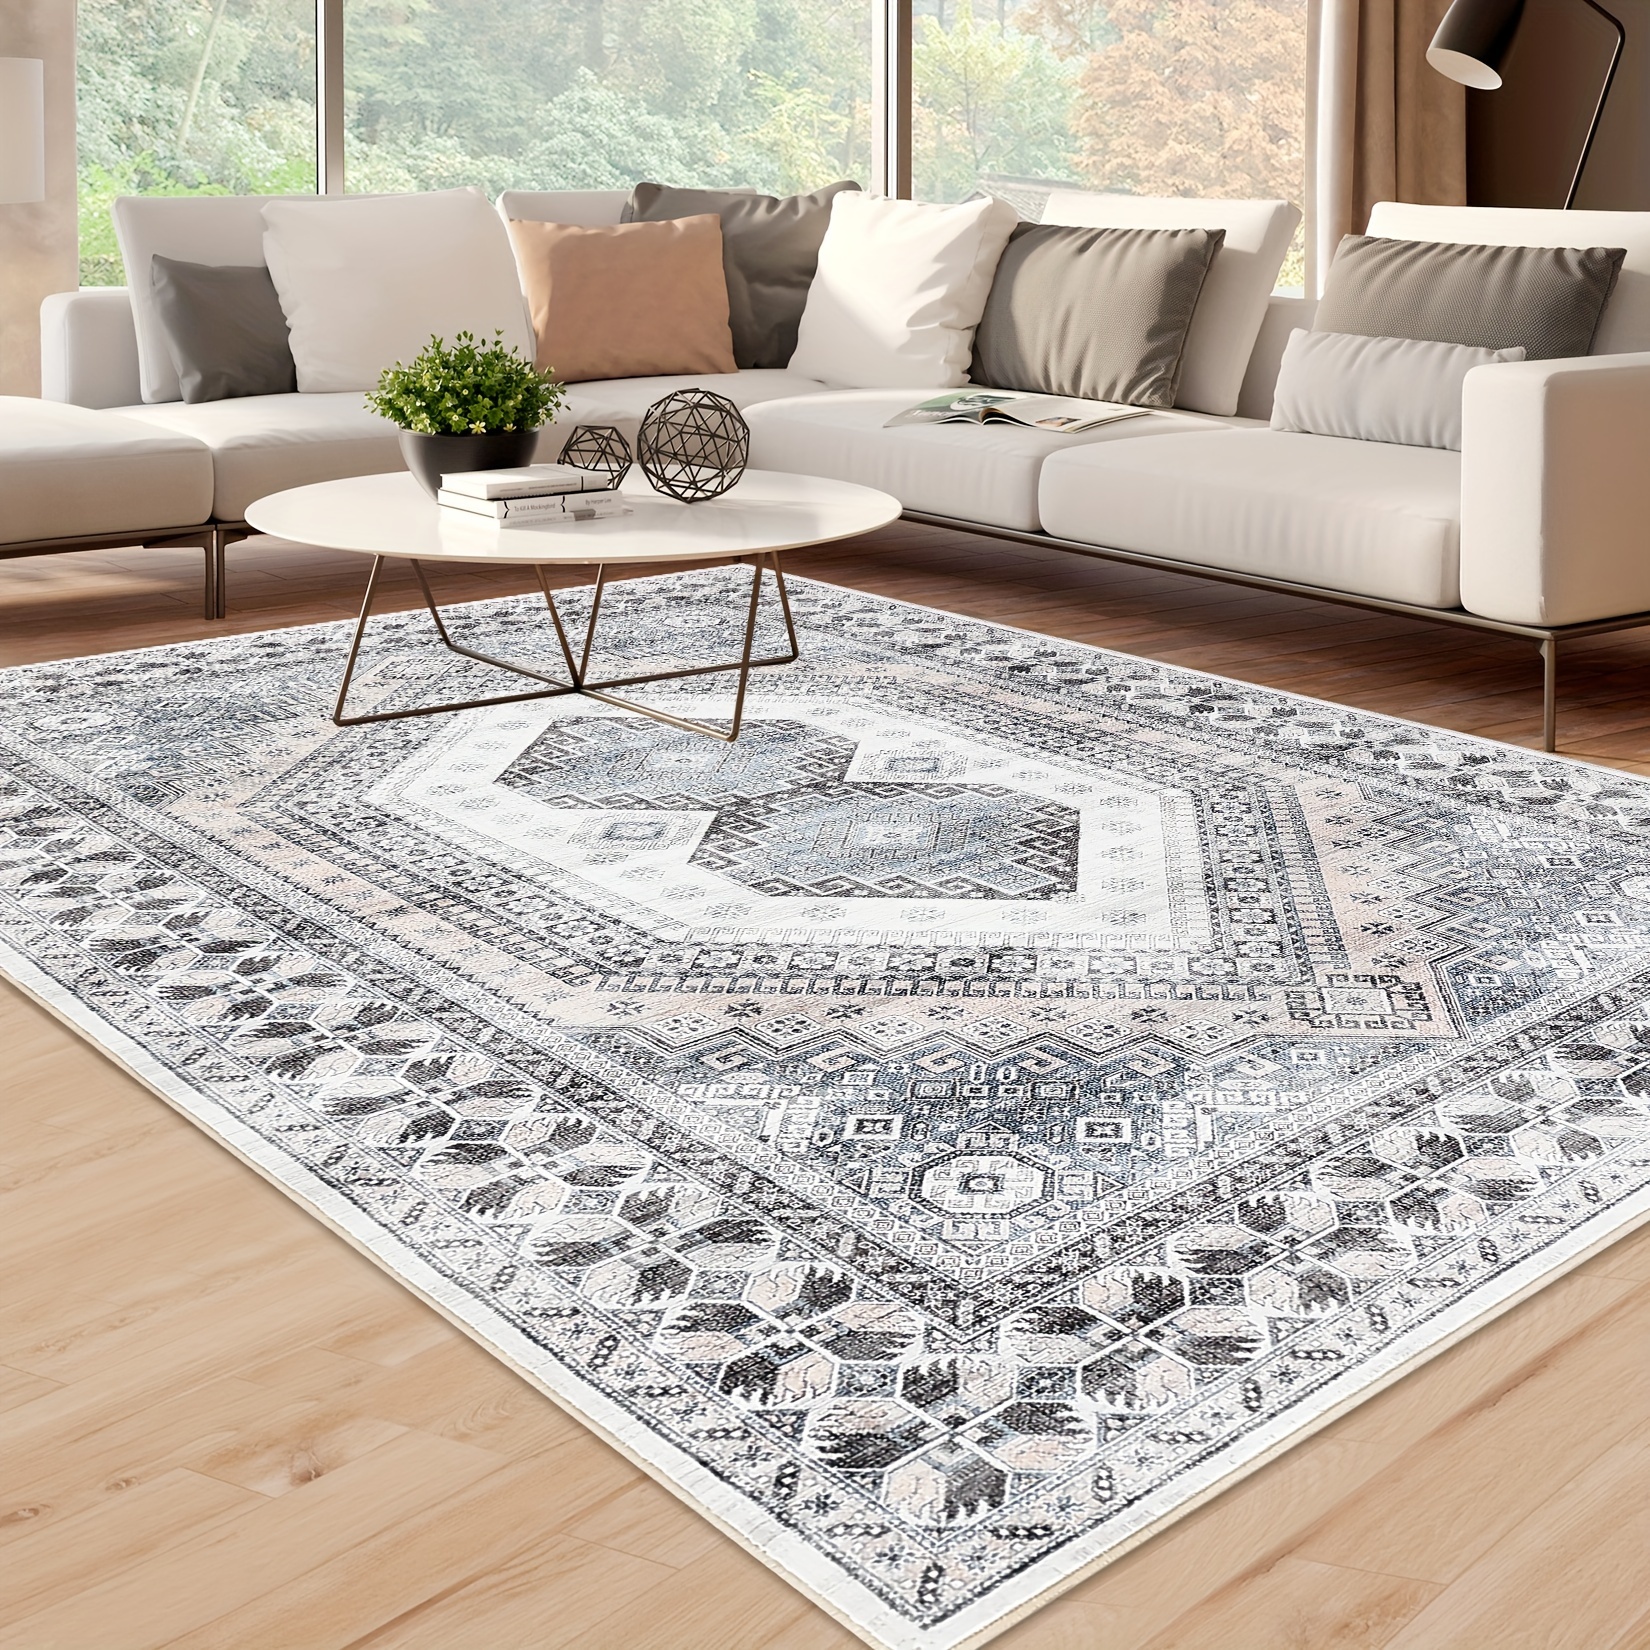 

1 Pc Large Area Rug Vintage Boho Rug Machine Washable Rug Ultra-thin Carpet With Non Slip Backing Stain Resistant Vintage Rugs For Living Room Bedroom, Beige Grey